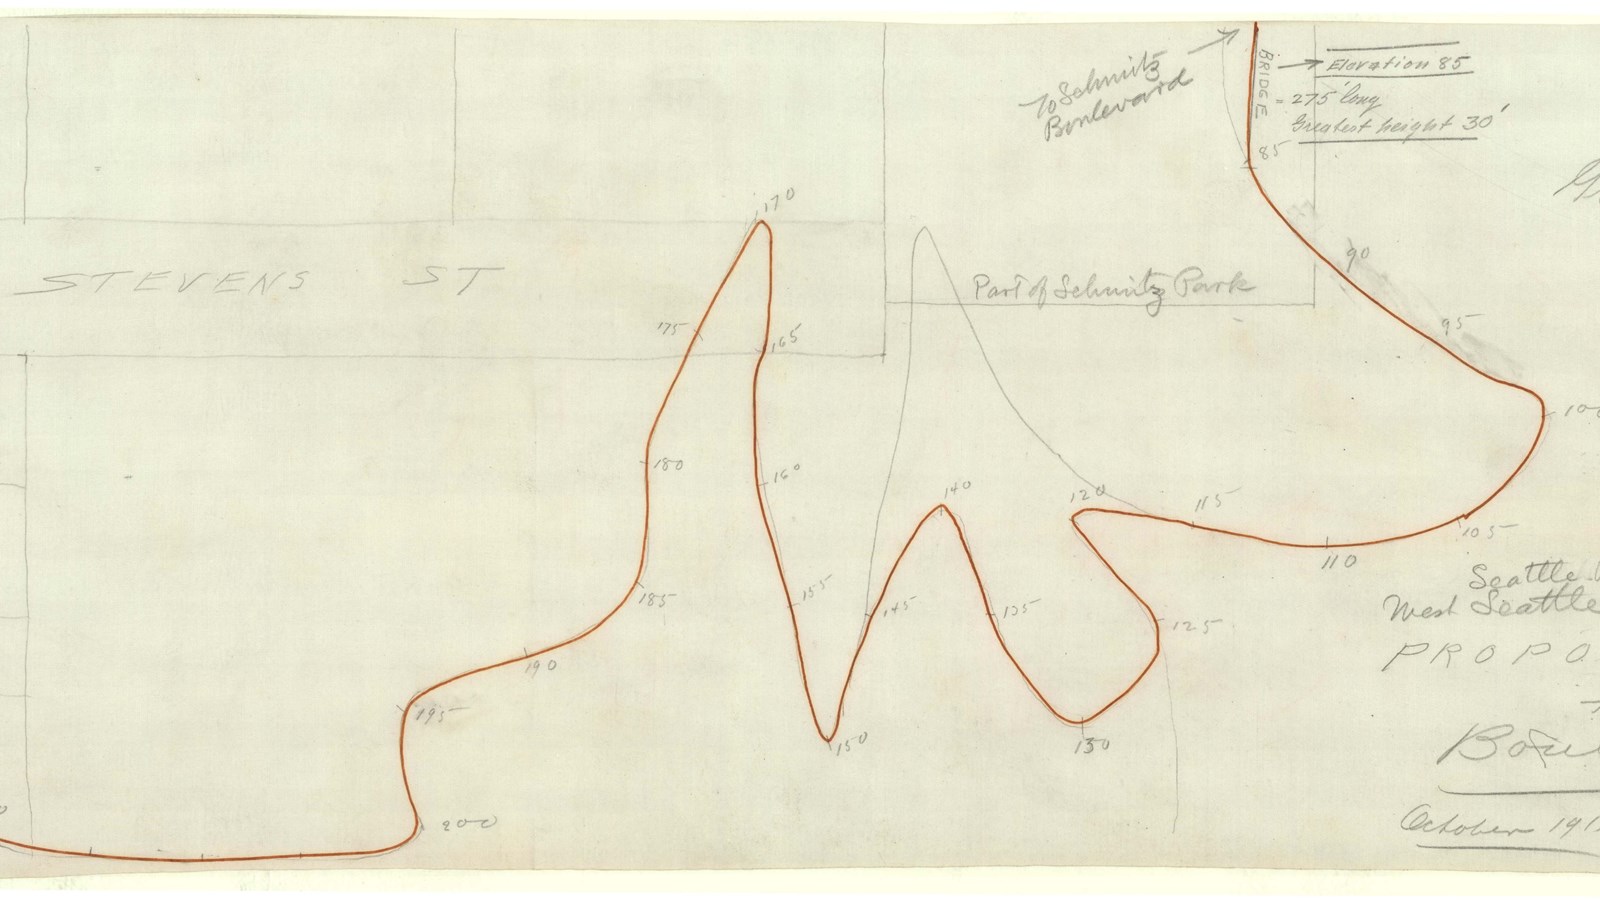 Pencil plan of red line that curves and juts around